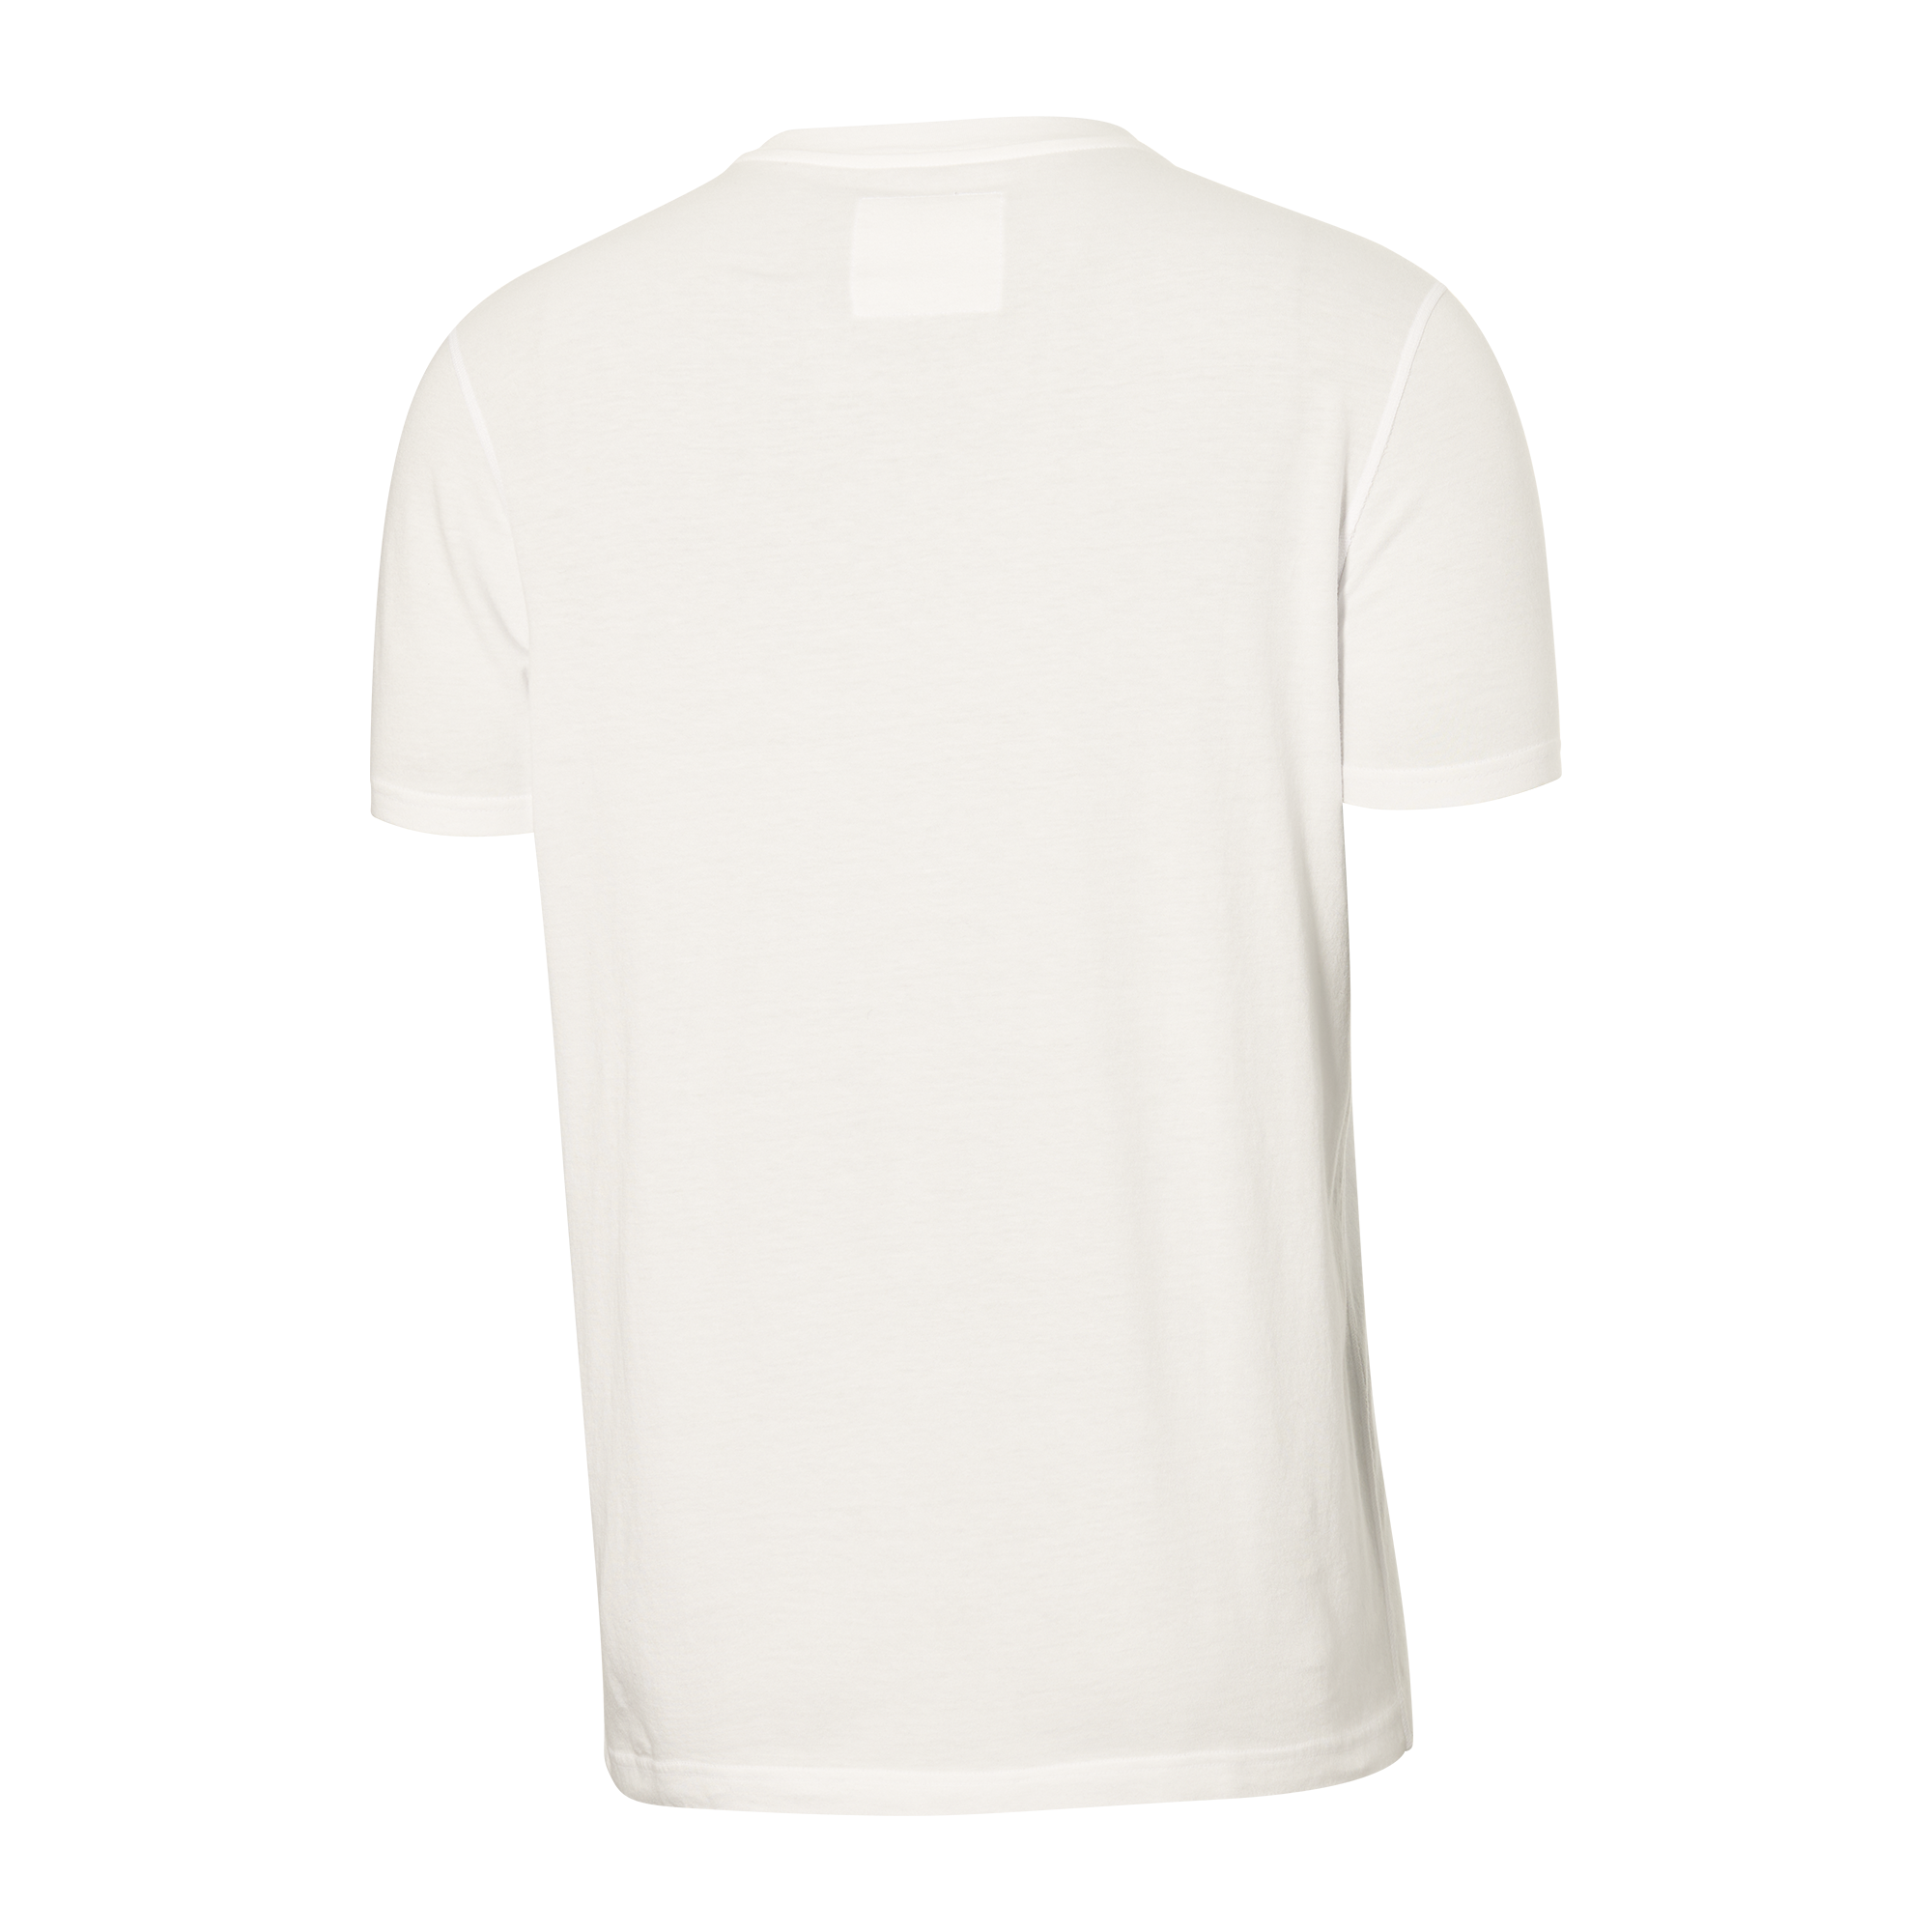 Saxx 3Six Five Tee - White Men’s - Other Men's - Tops by Saxx | Grace the Boutique